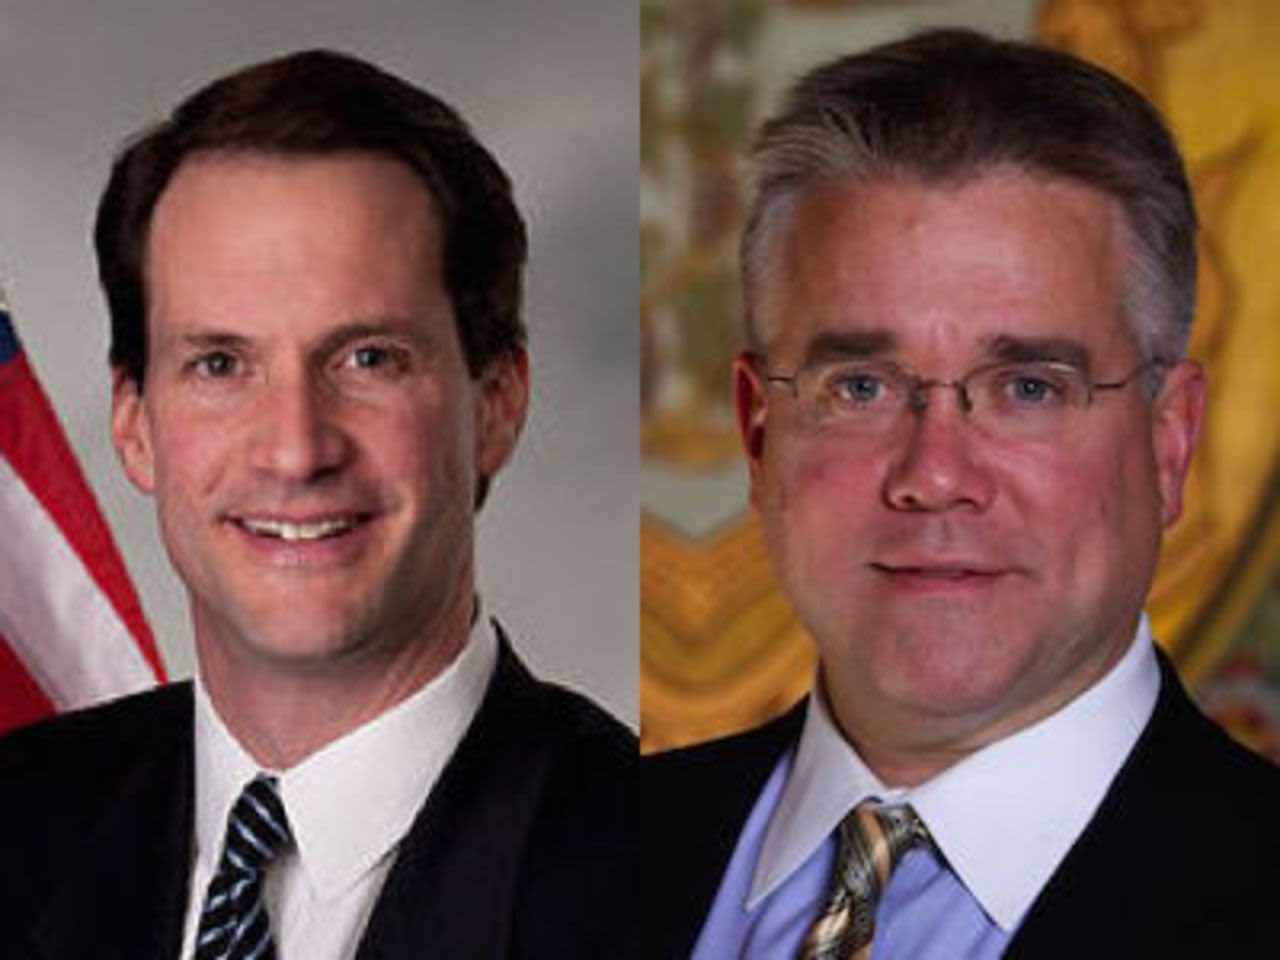 In the race for the 4th Congressional District, Republican challenger John Shaban, right, is taking on four-term Democratic incumbent Jim Himes, left.